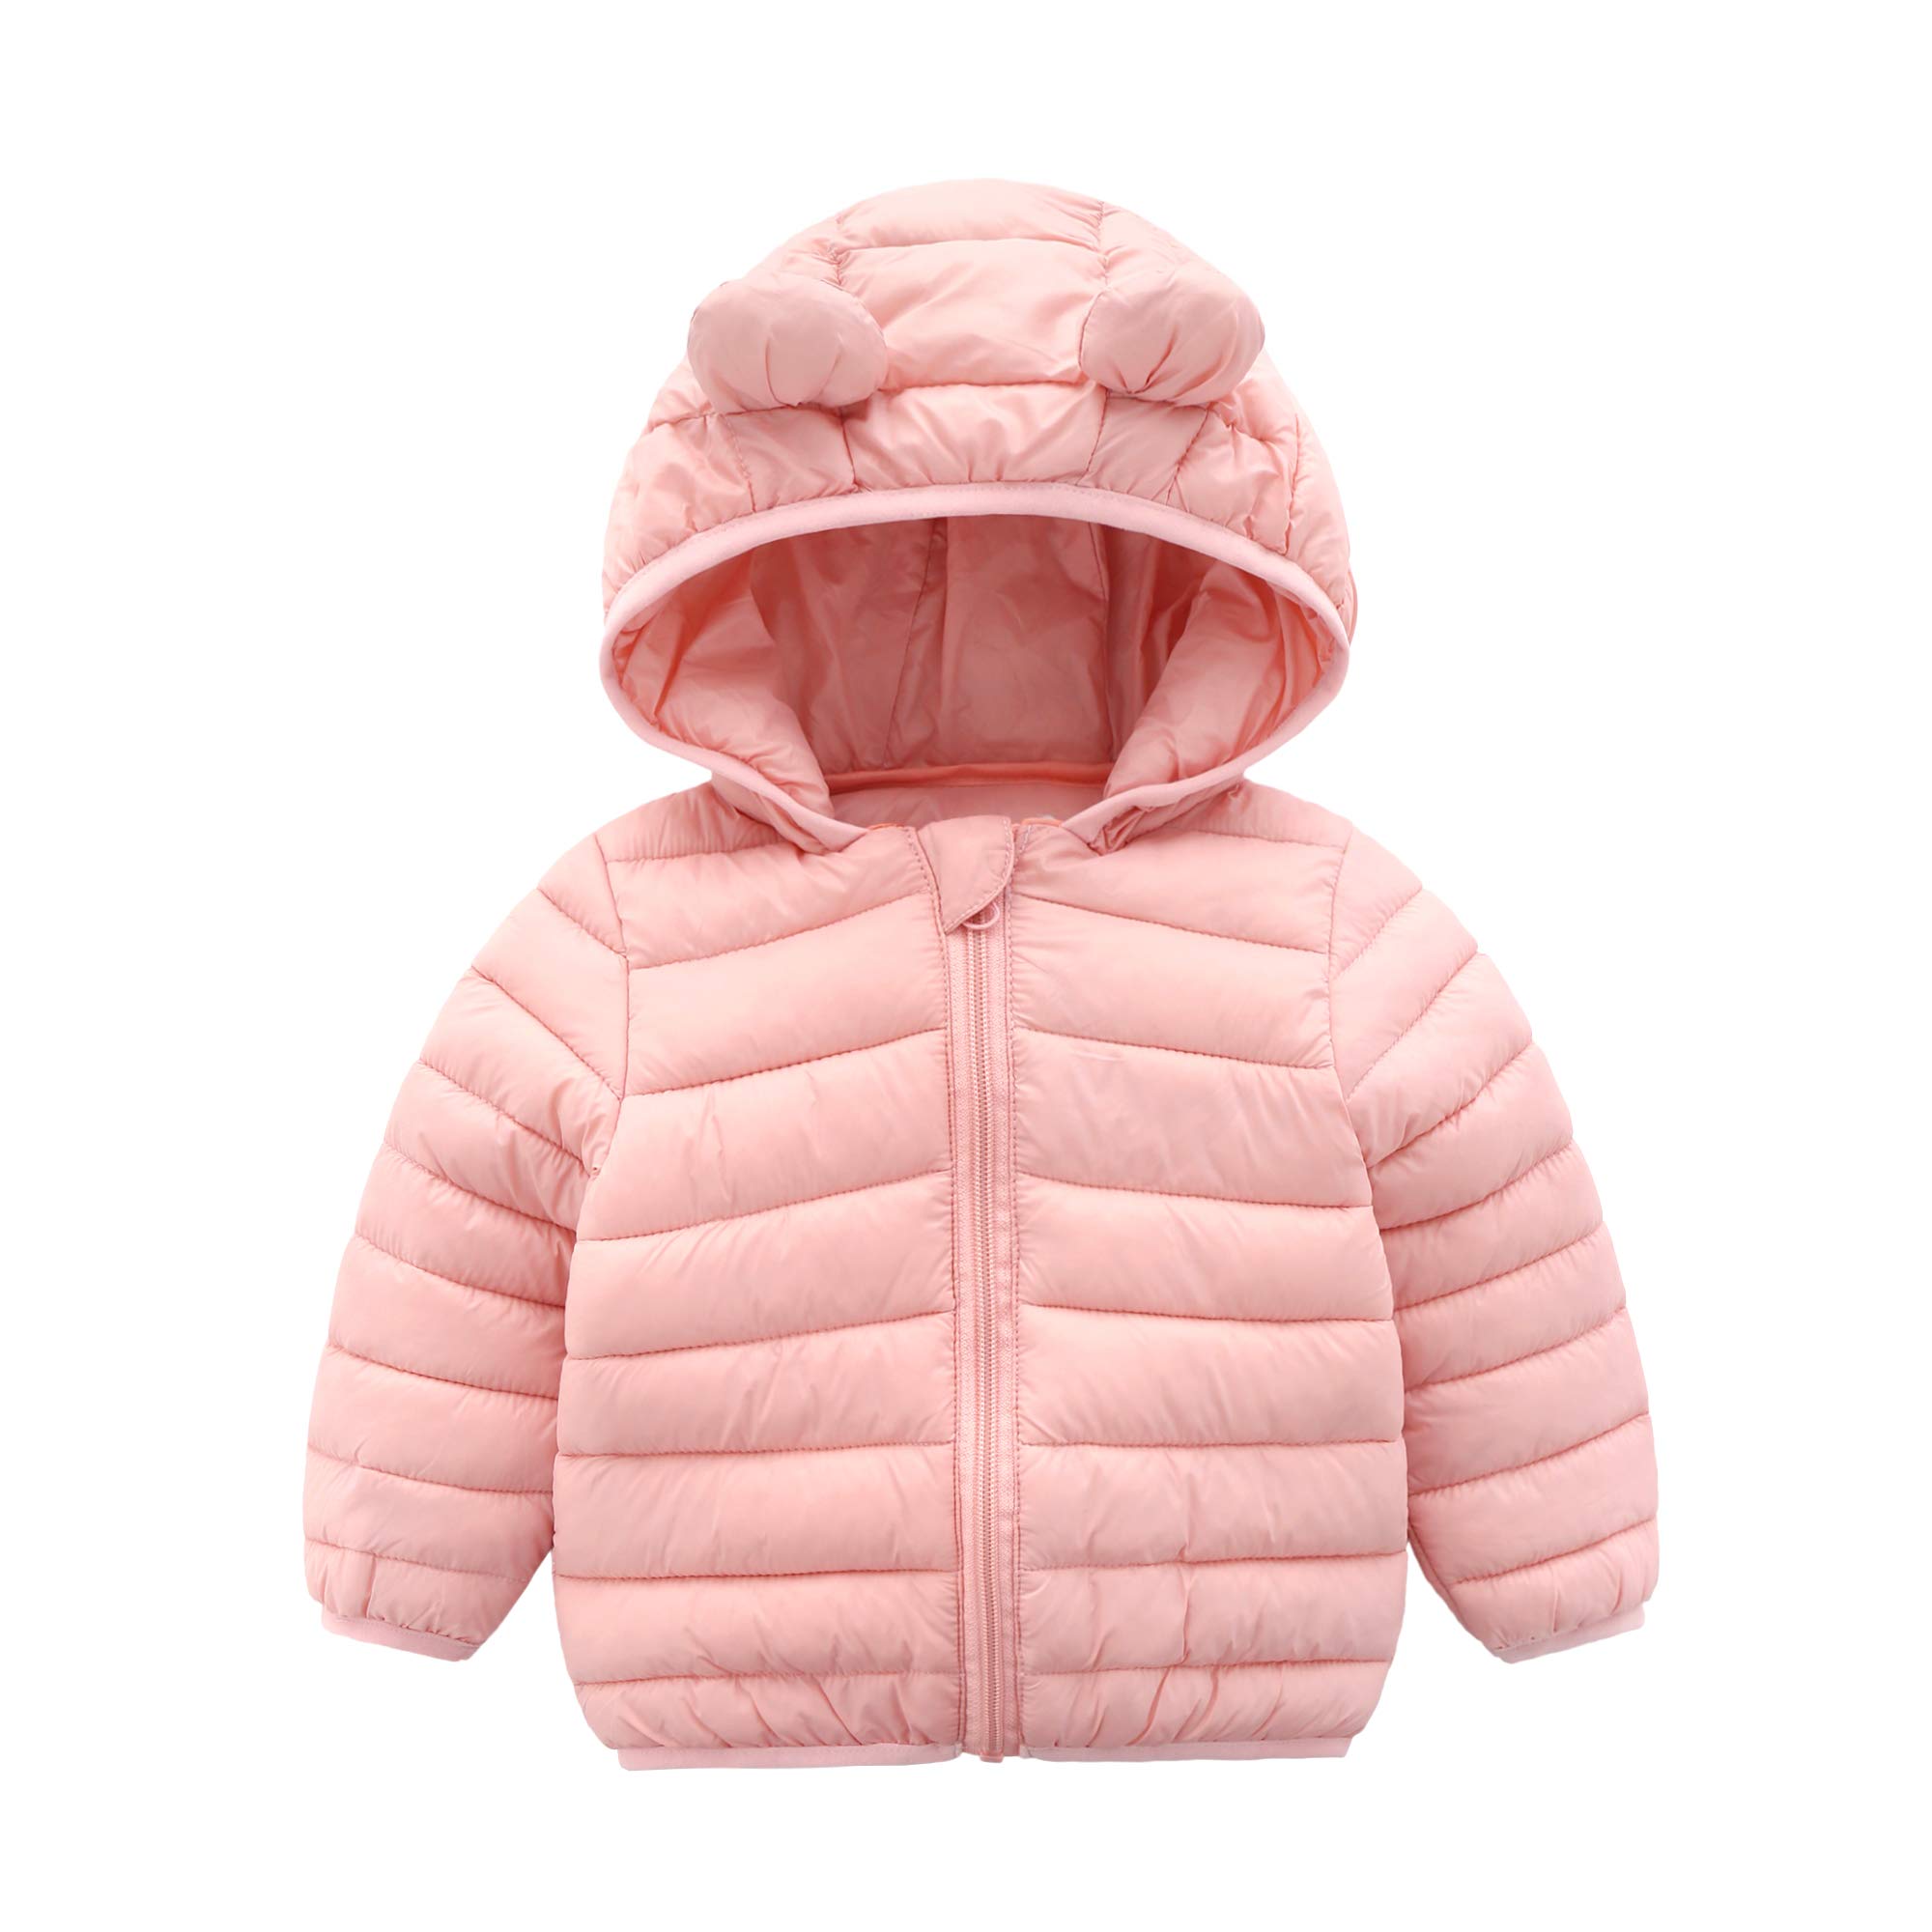 cEcORc Winter coats for Kids with Hoods (Padded) Light Puffer Jacket for Outdoor Warmth, Travel, Snow Play  girls, Boys  Baby, I